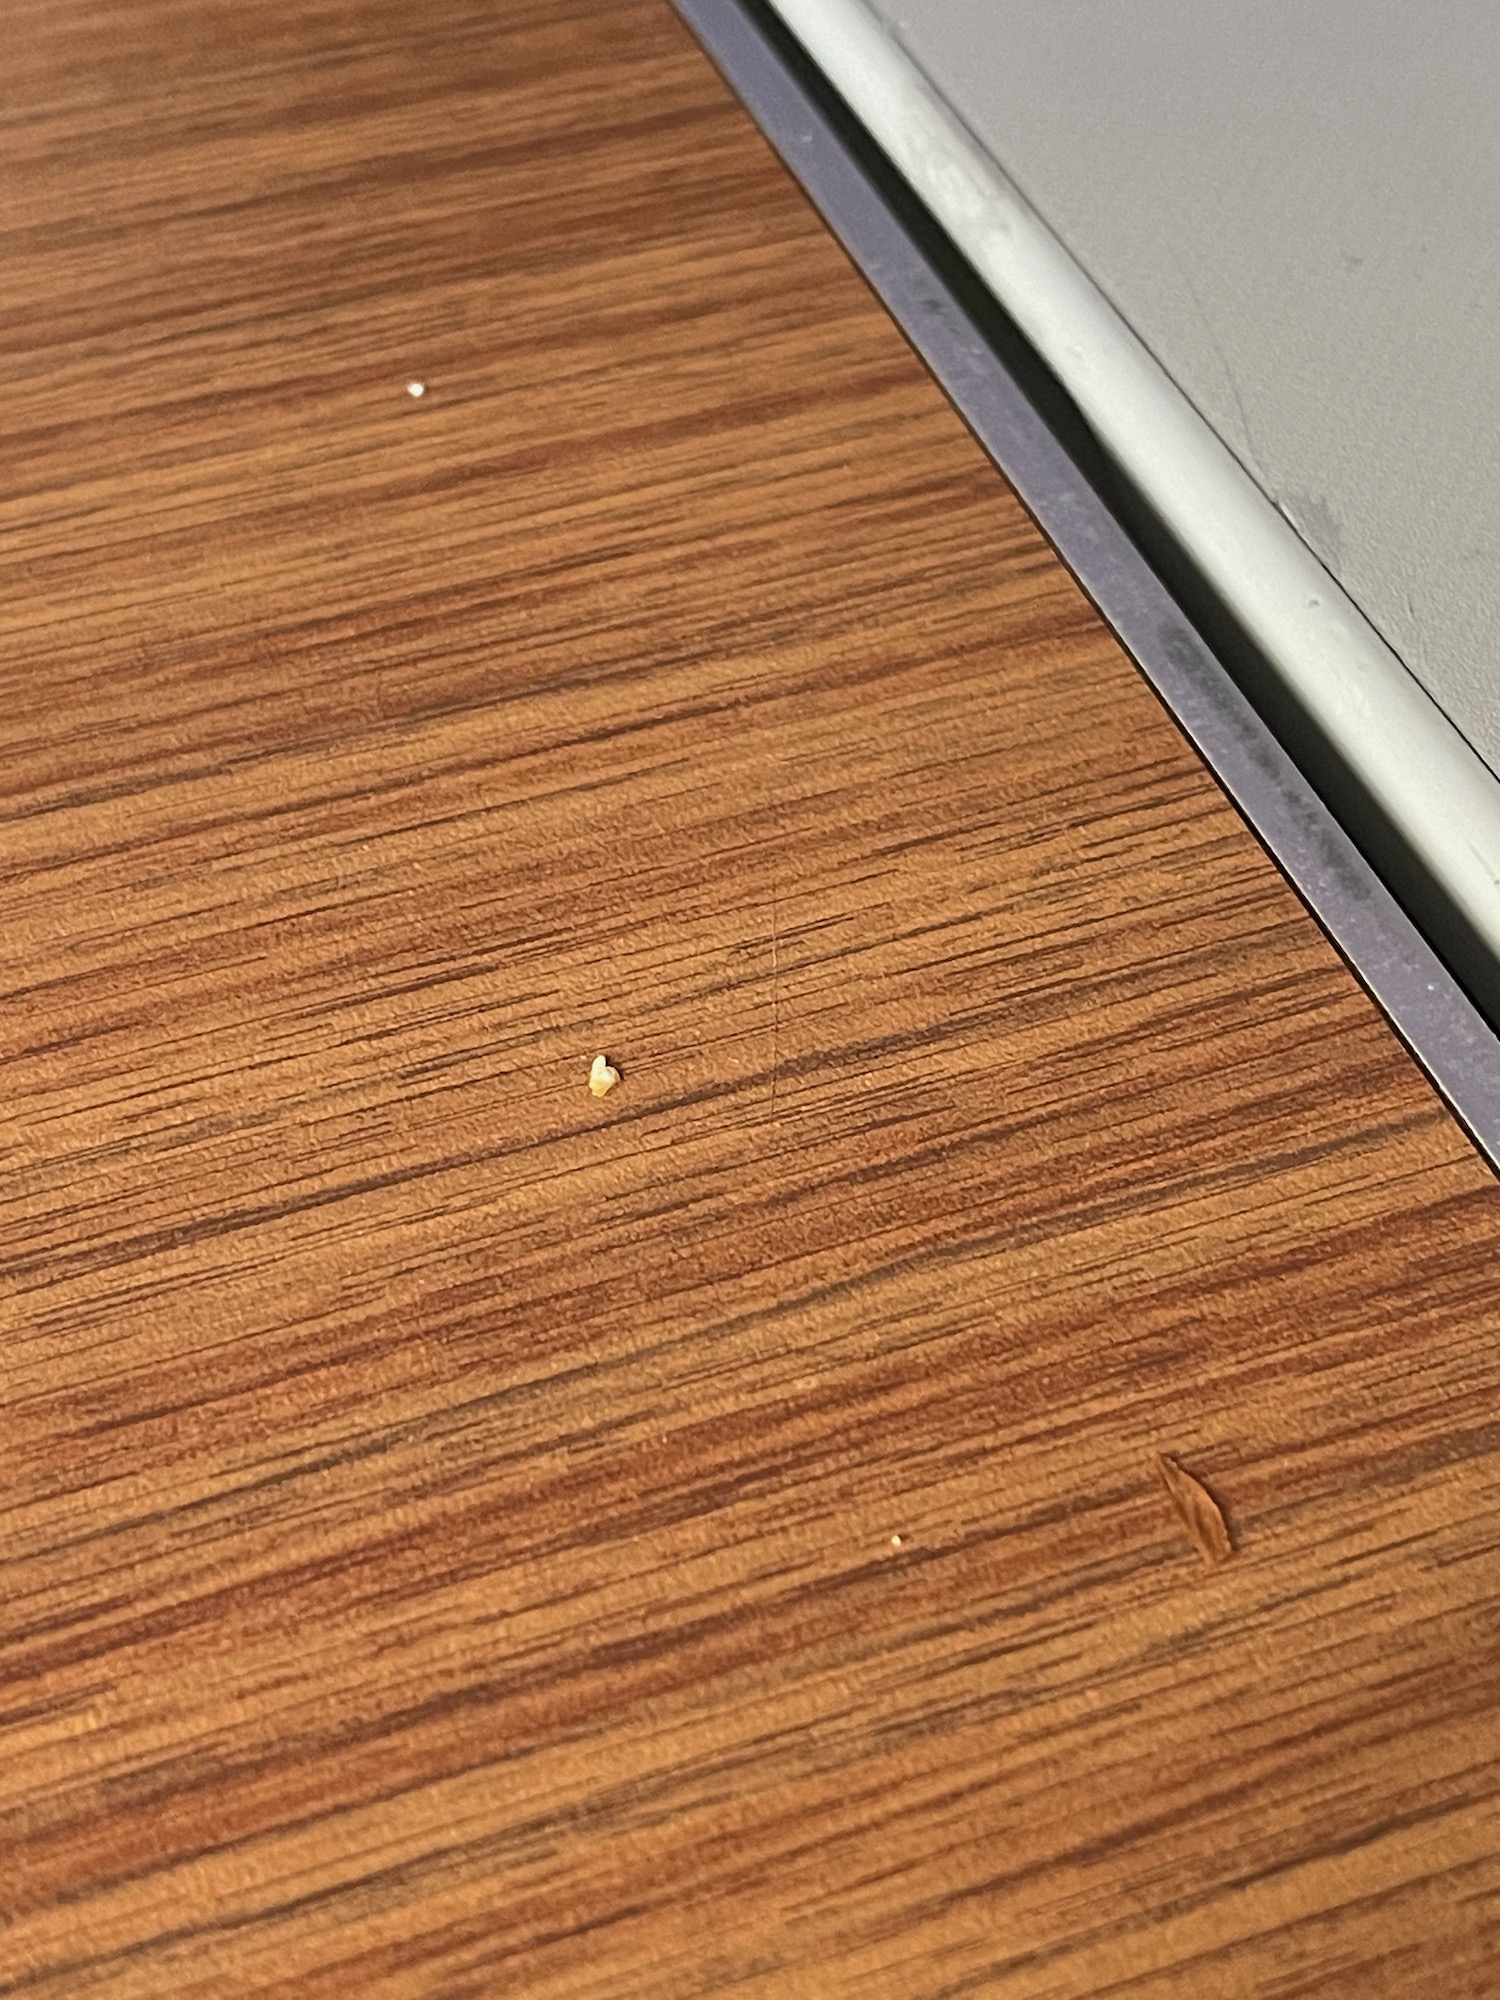 a wood surface with a crumb on it